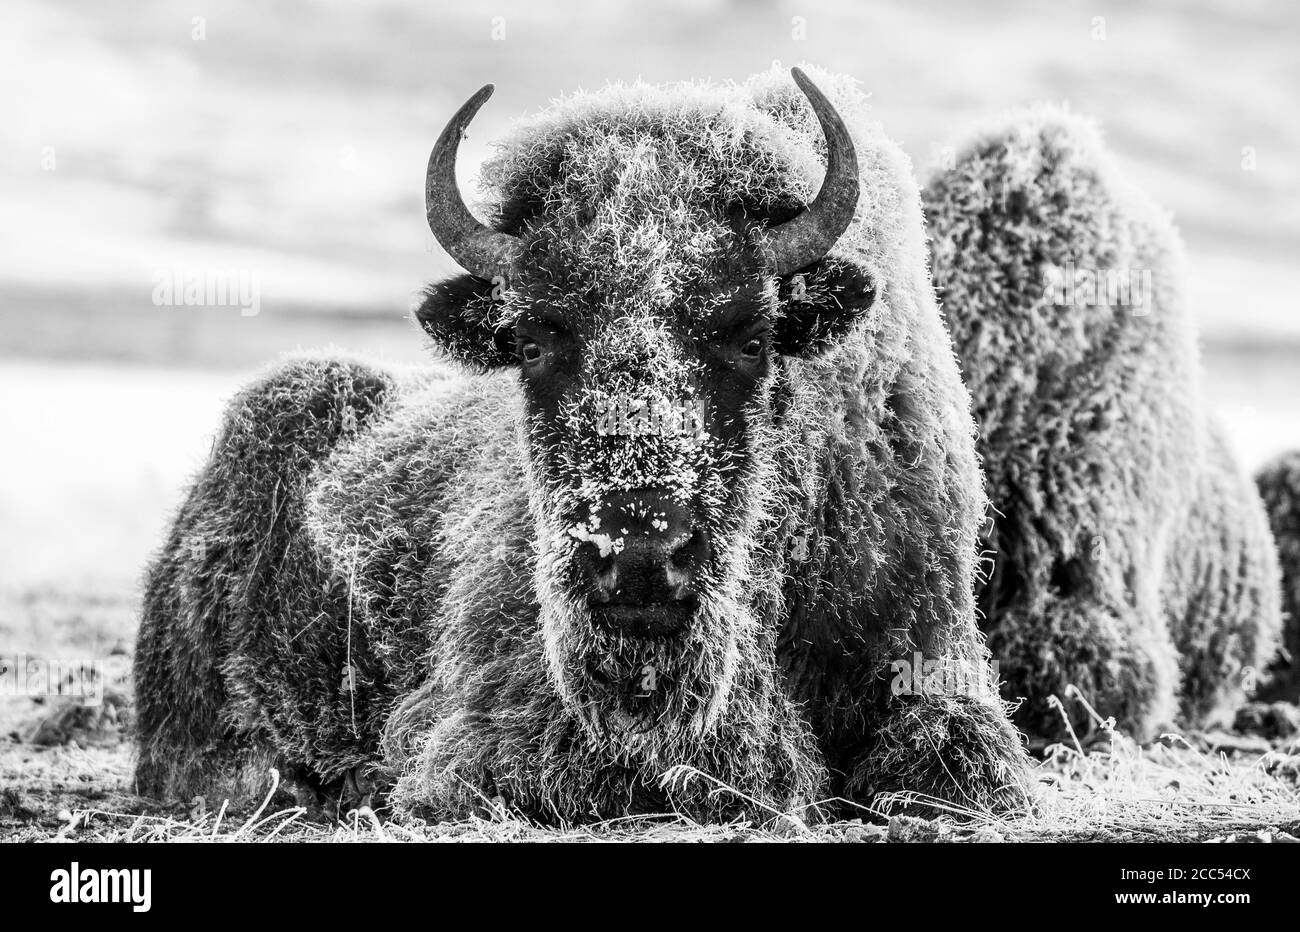 Bison Black and White Stock Photos & Images - Alamy